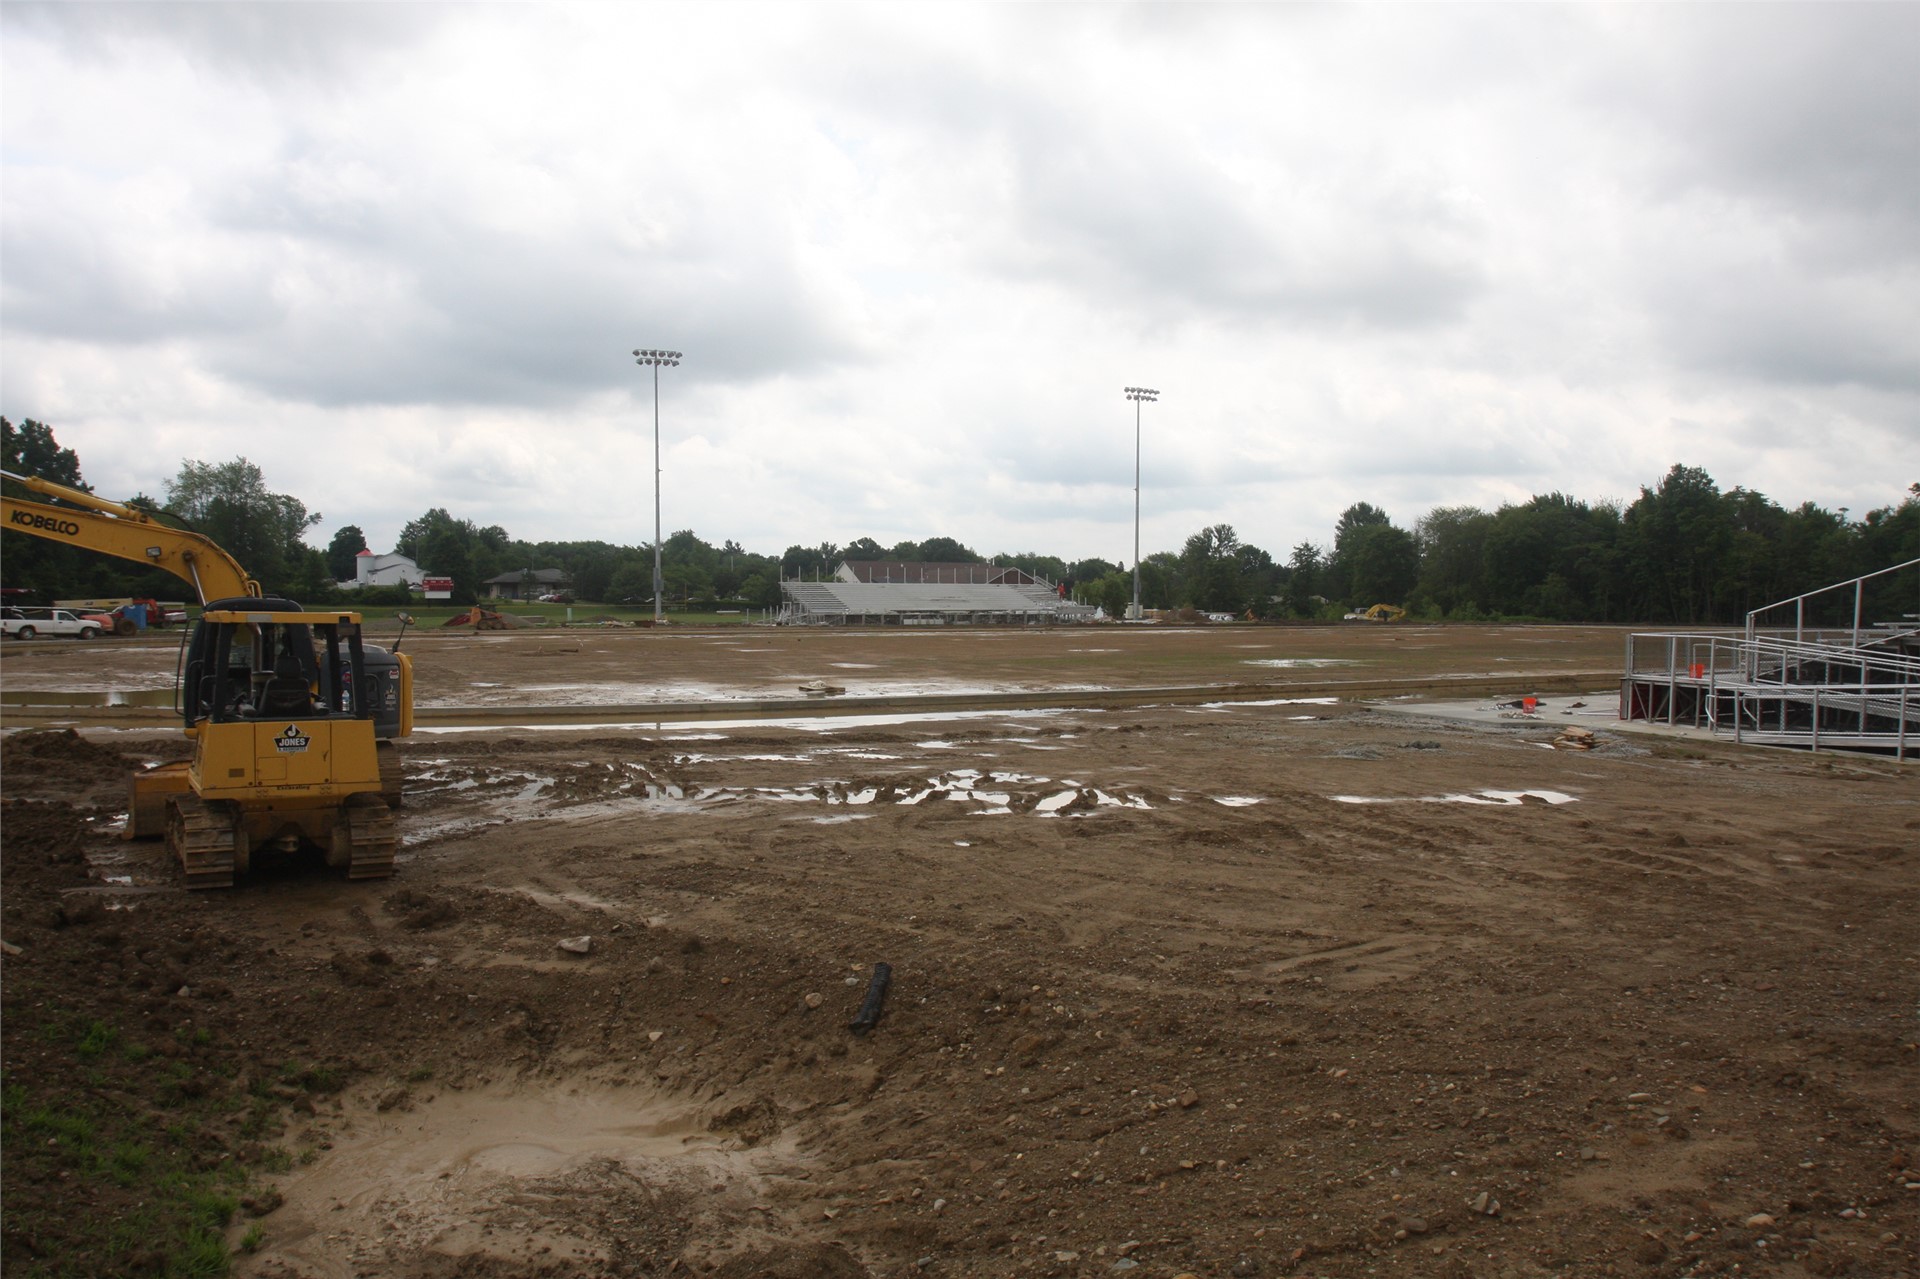 View of field from northwest corner (home side) of stadium